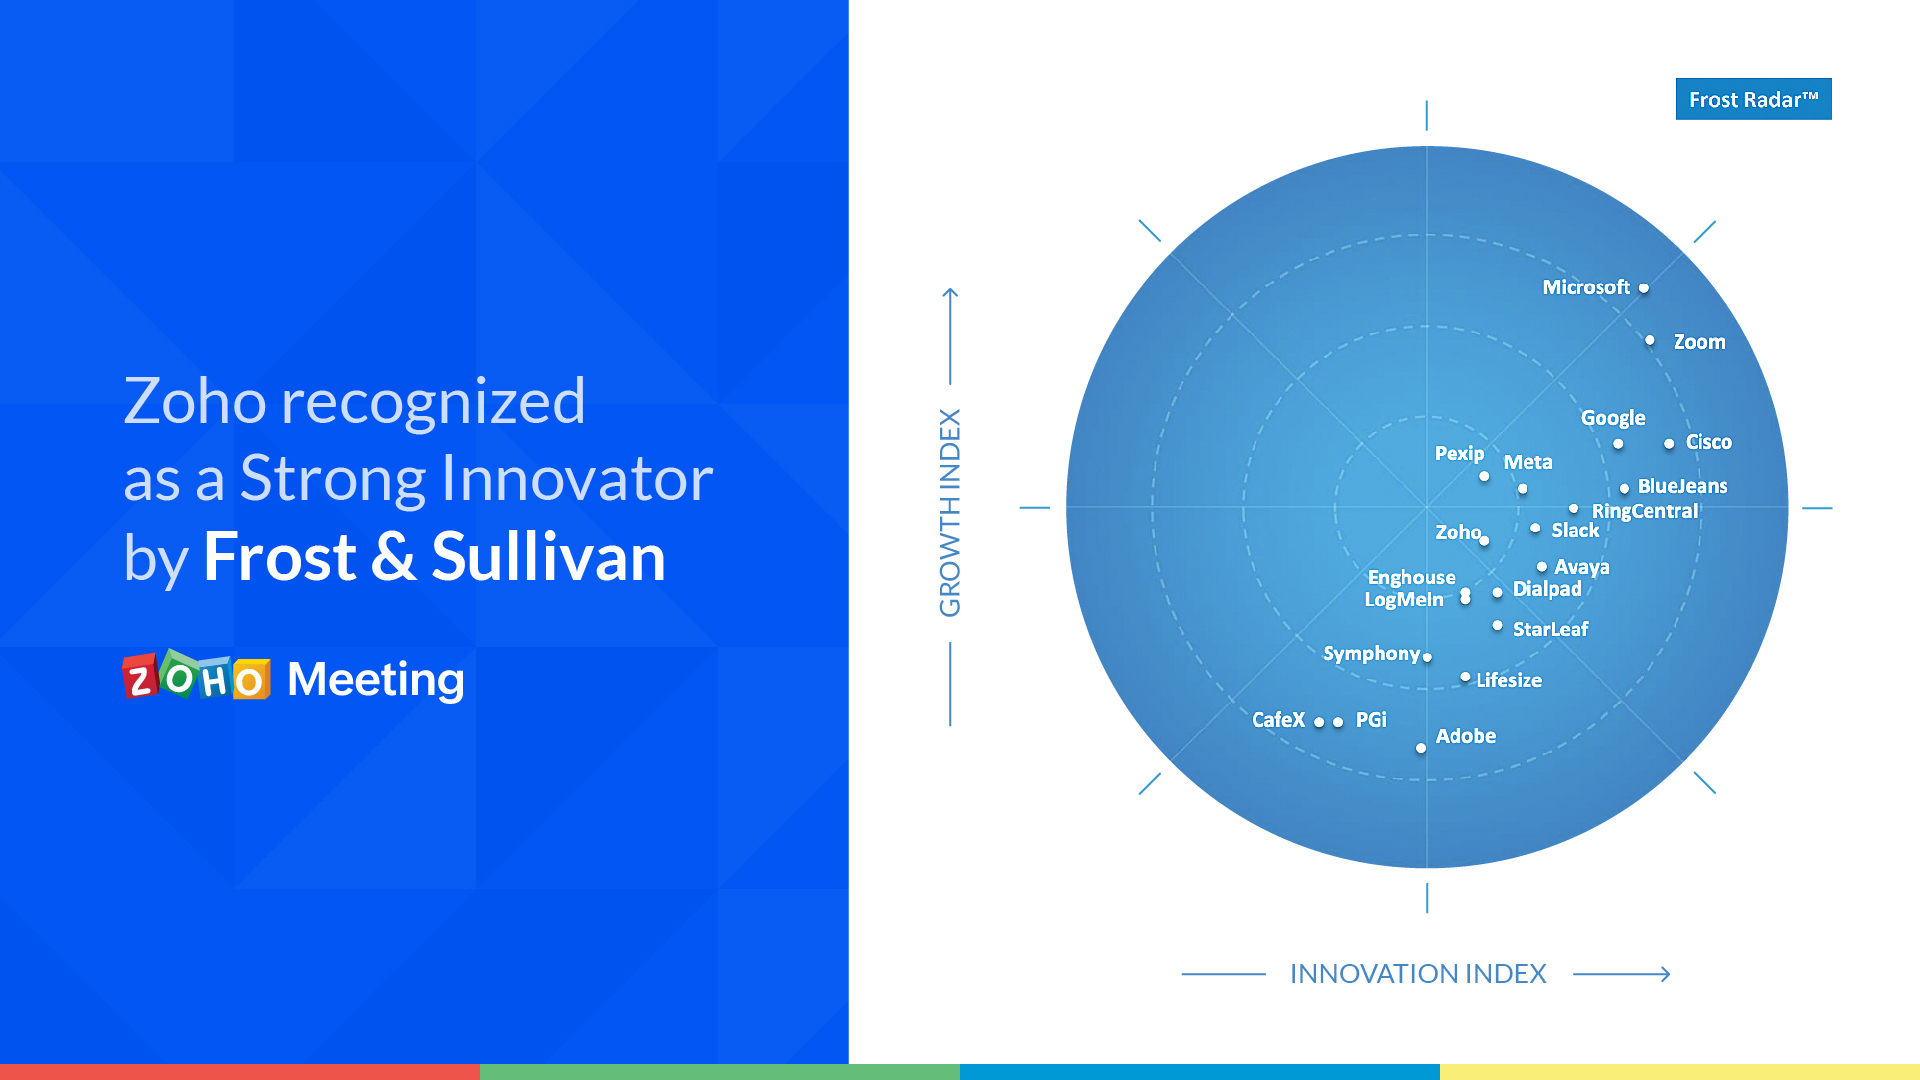 Zoho recognized as Strong Innovator by Frost & Sullivan